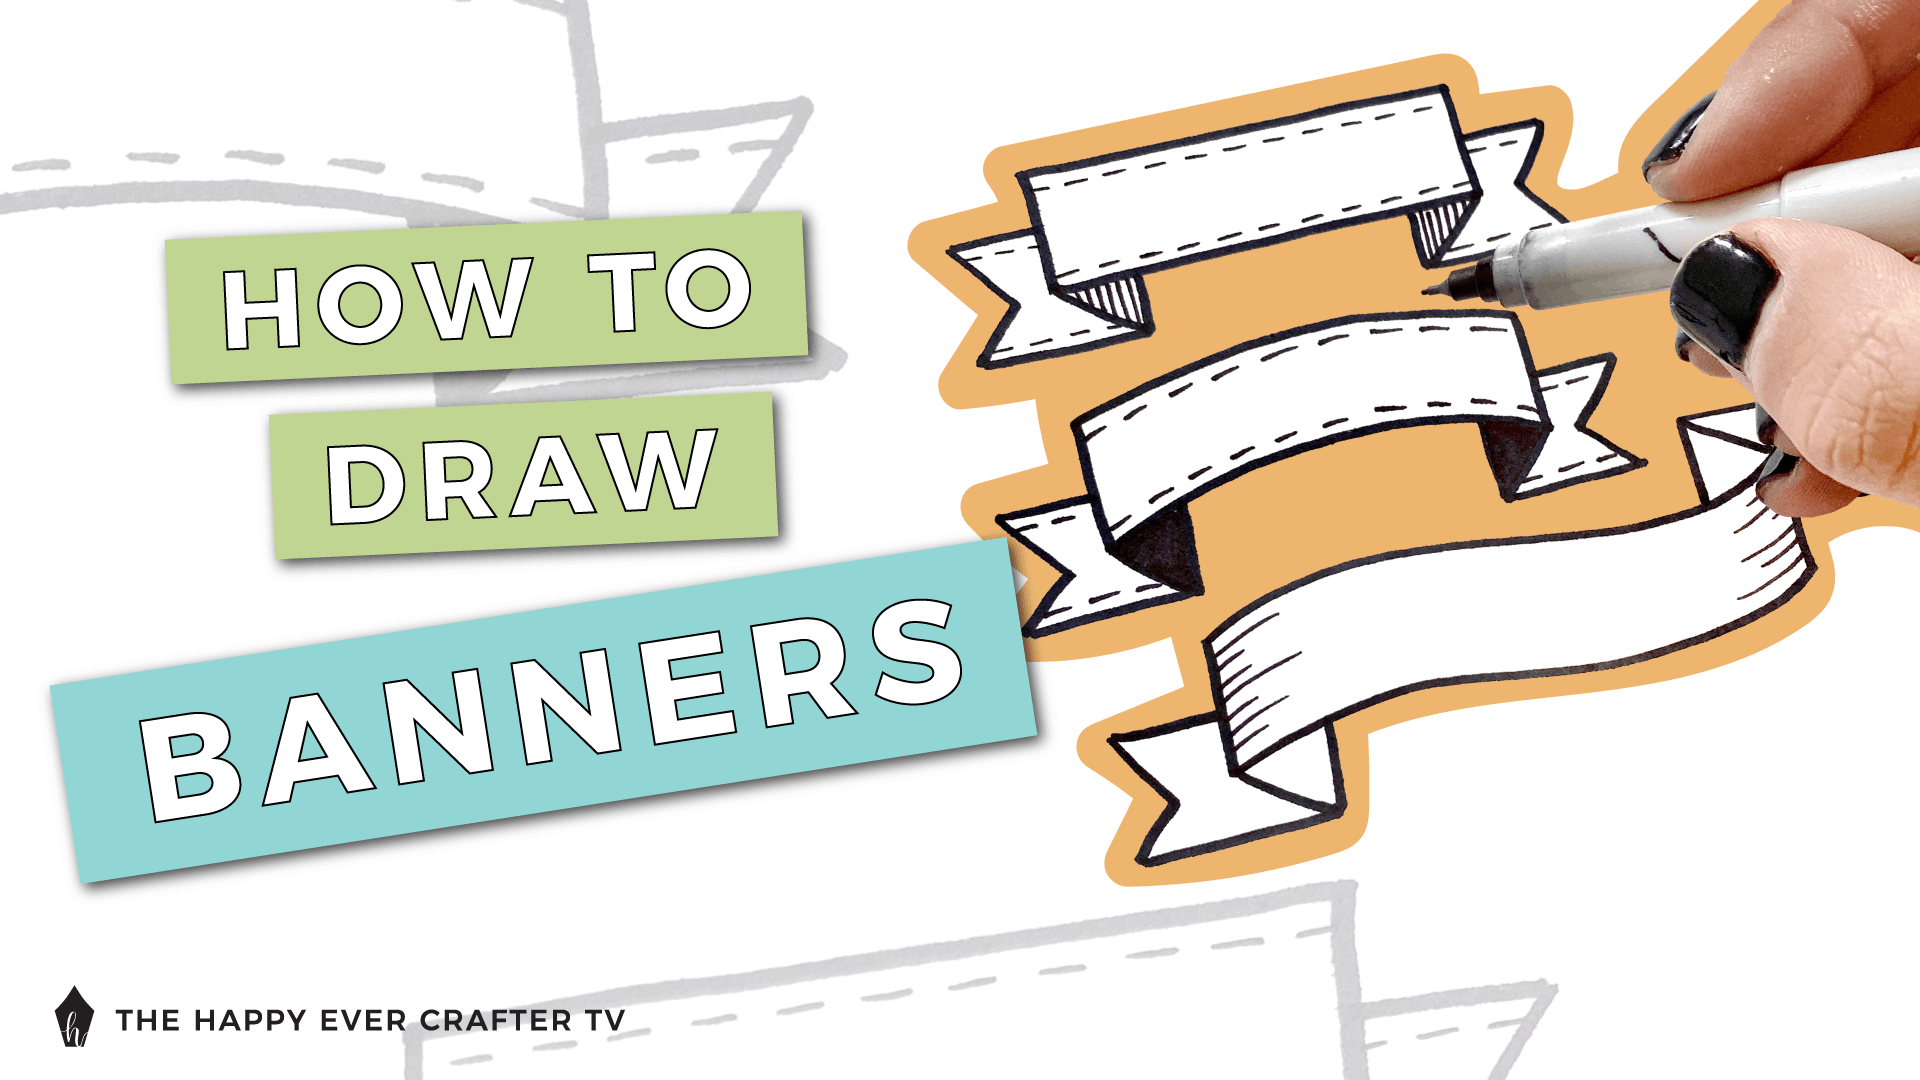 How to Draw Banners - The Happy Ever Crafter